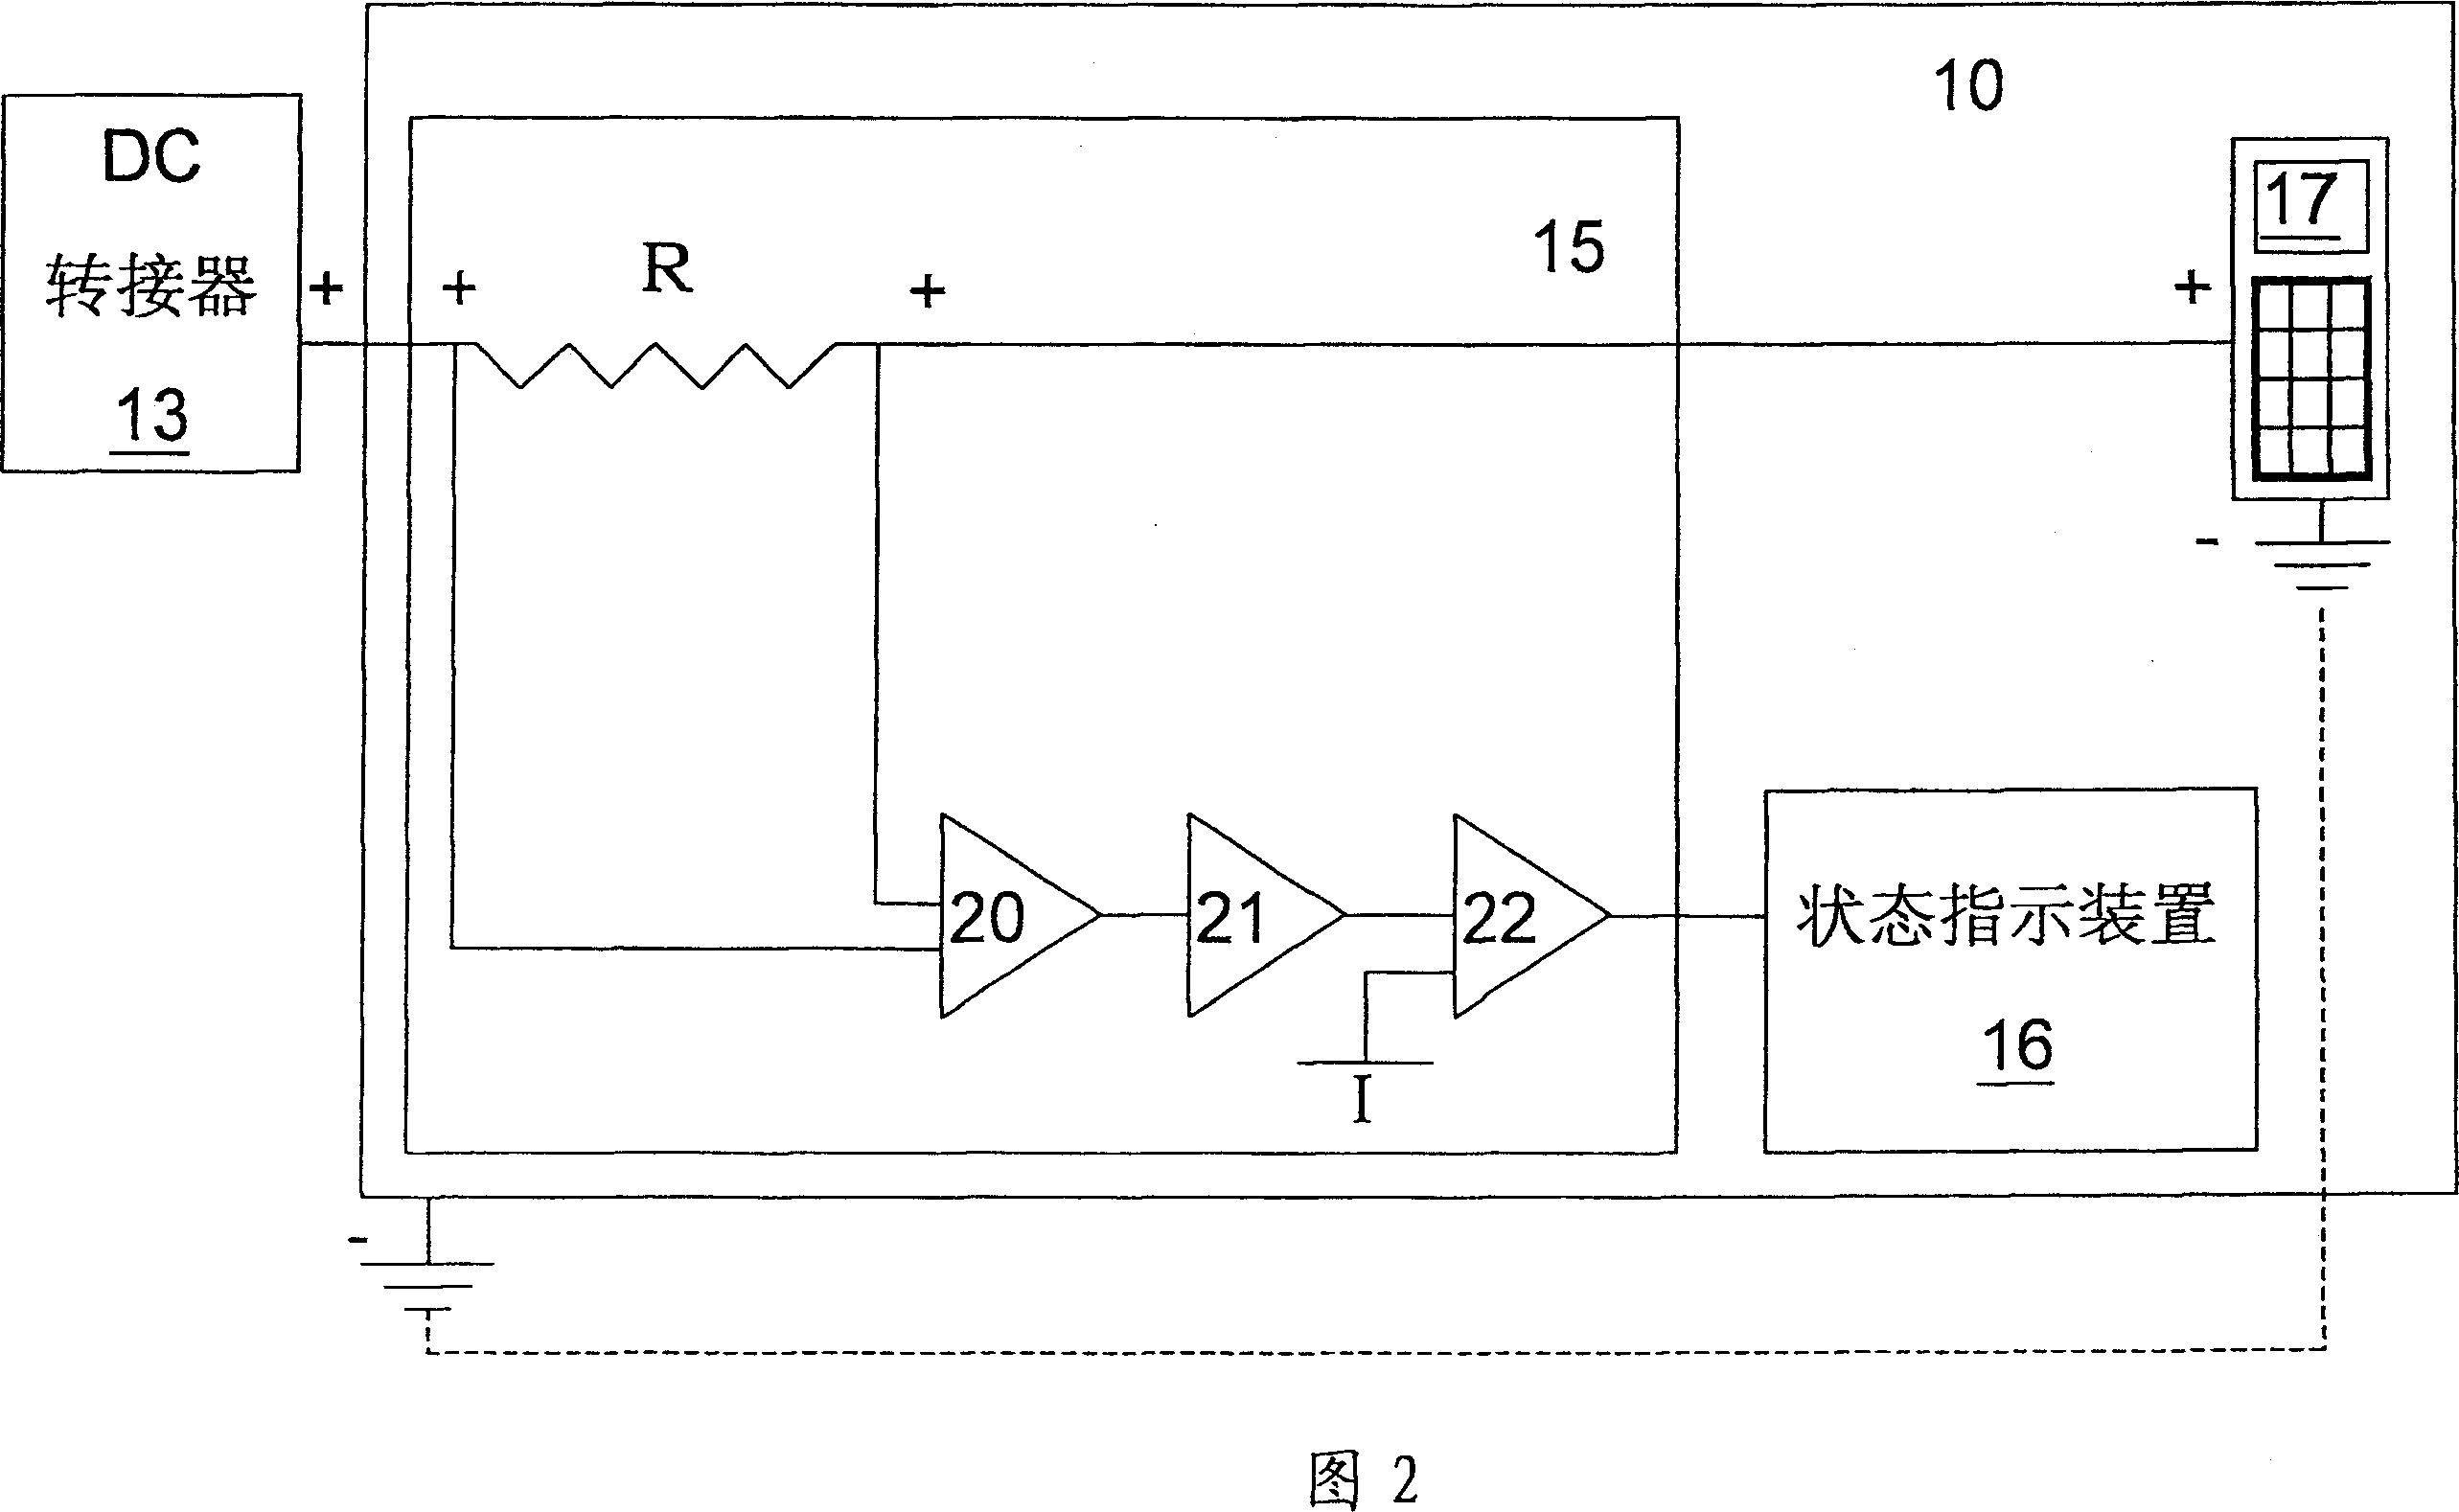 External wireless network apparatus with charging module